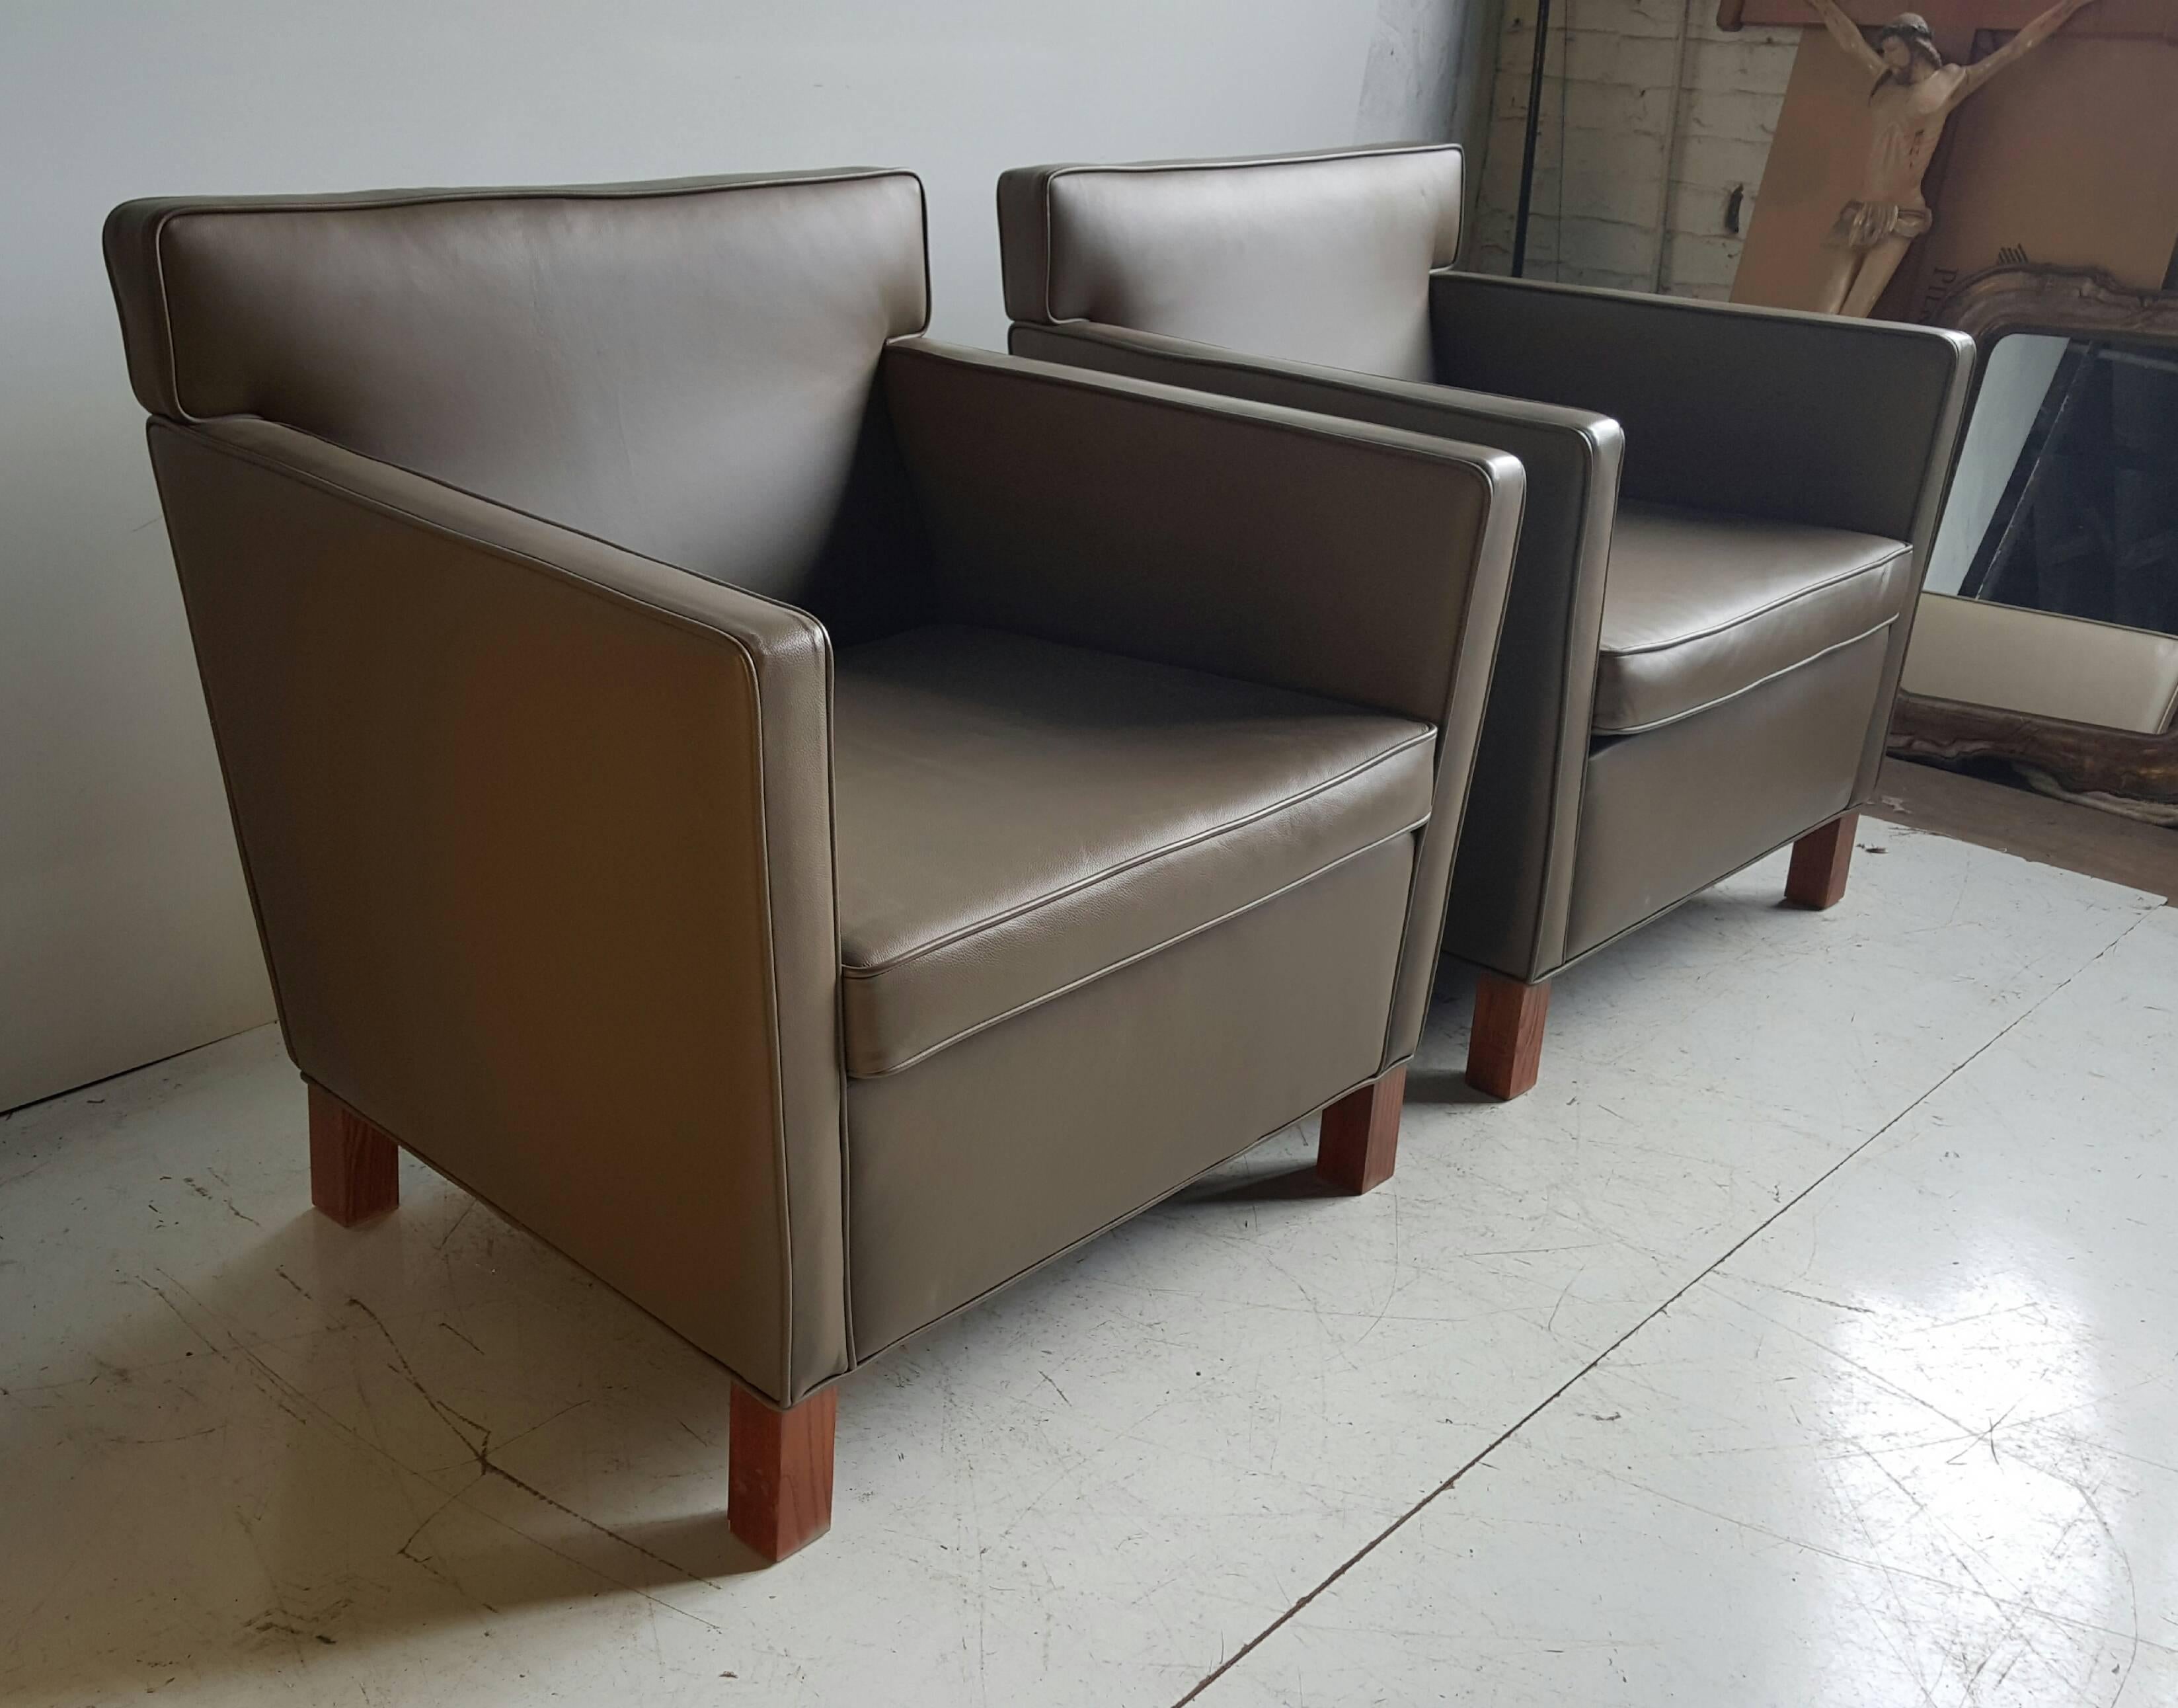 Pair of Mies van der Rohe Krefeld lounge or club chairs for Knoll with original spinneybeck leather upholstery. Recent production based on his 1927 design for the Esters and Lange residences in Krefeld, Germany. Measures: Arm: H 25 and seat is 18